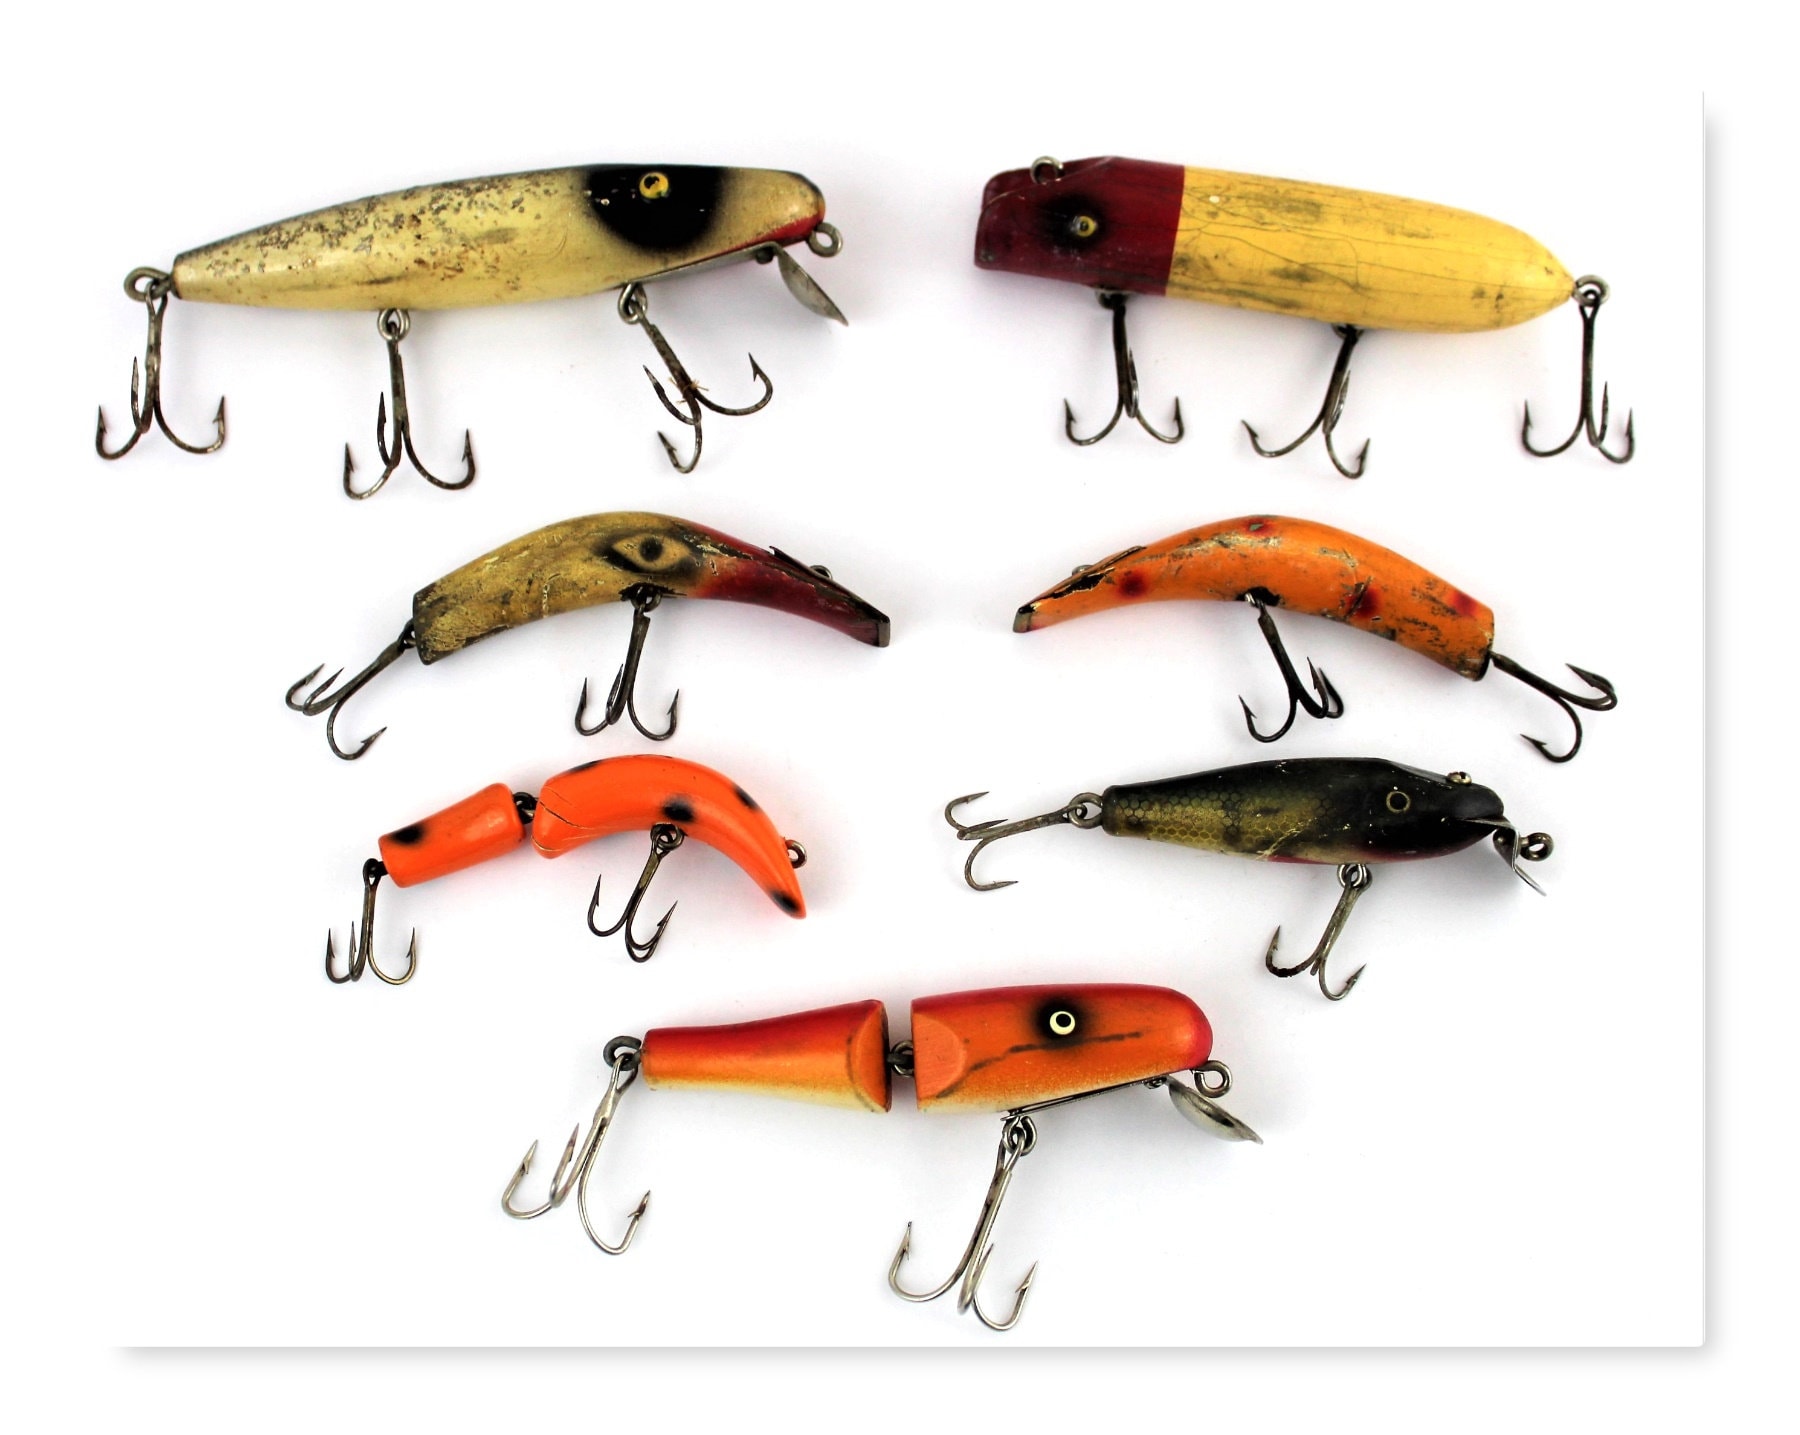 Vintage Fishing Lures, Seven Wooden Fishing Lures